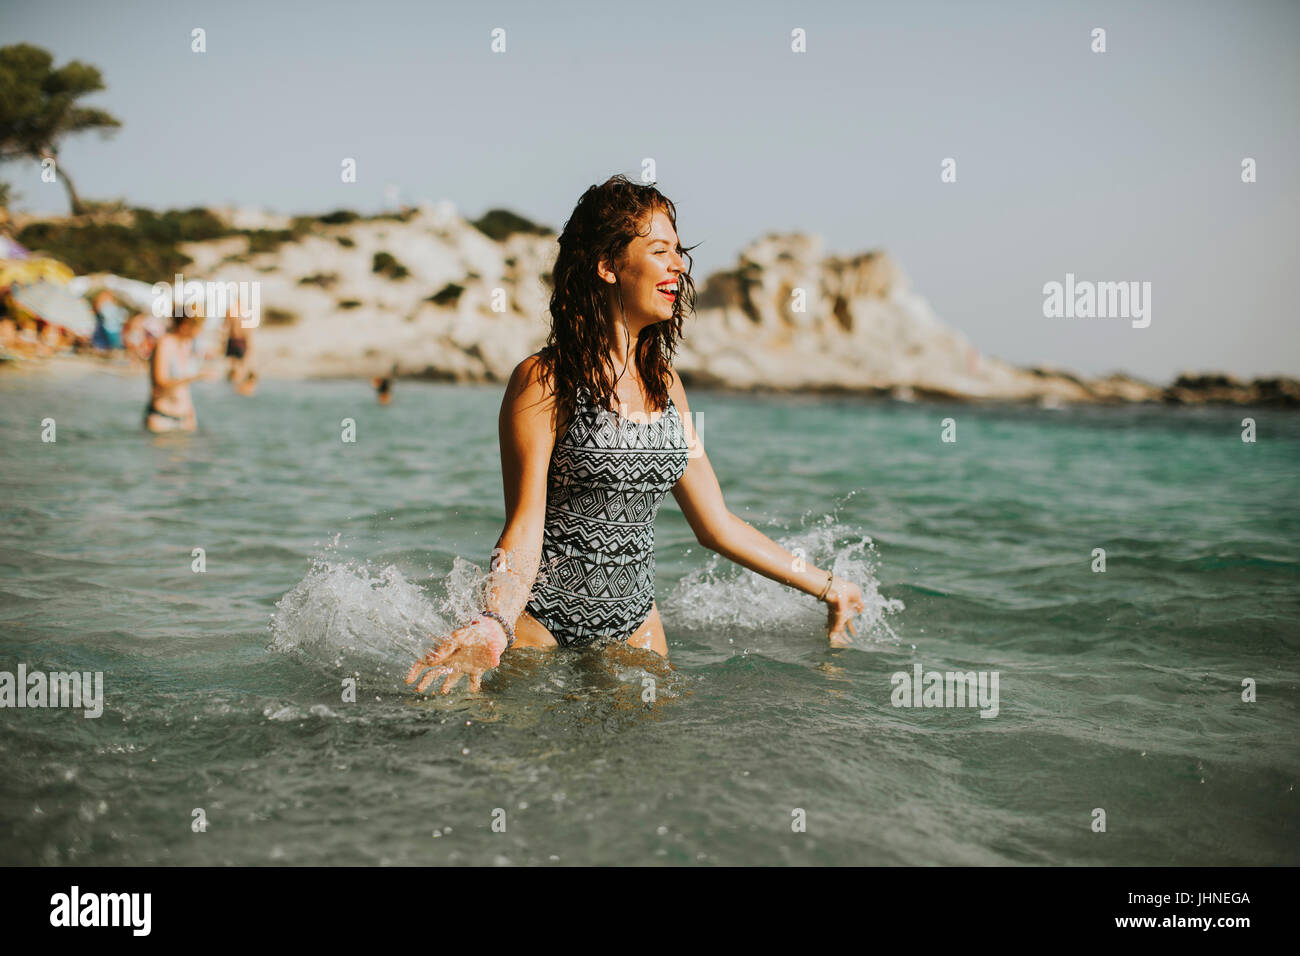 View at woman standing in the sea water Stock Photo